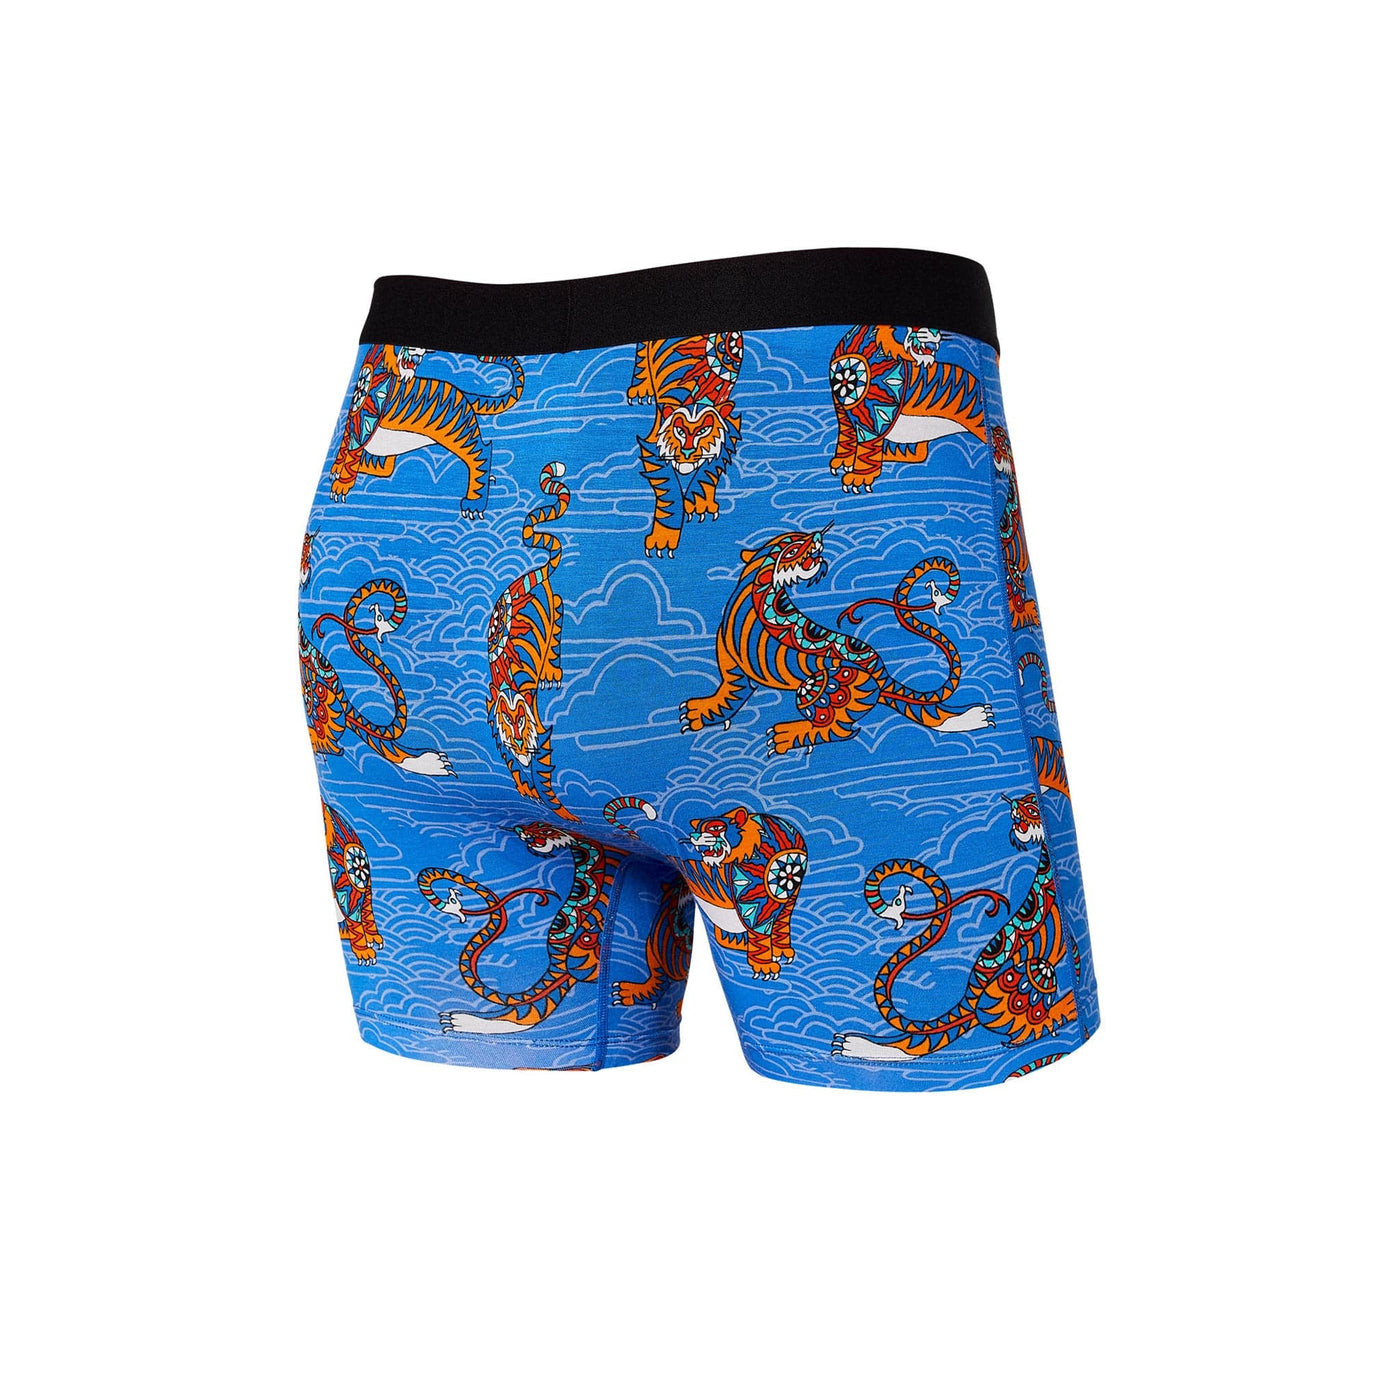 Saxx Vibe Boxers - Blue Year Of The Tiger